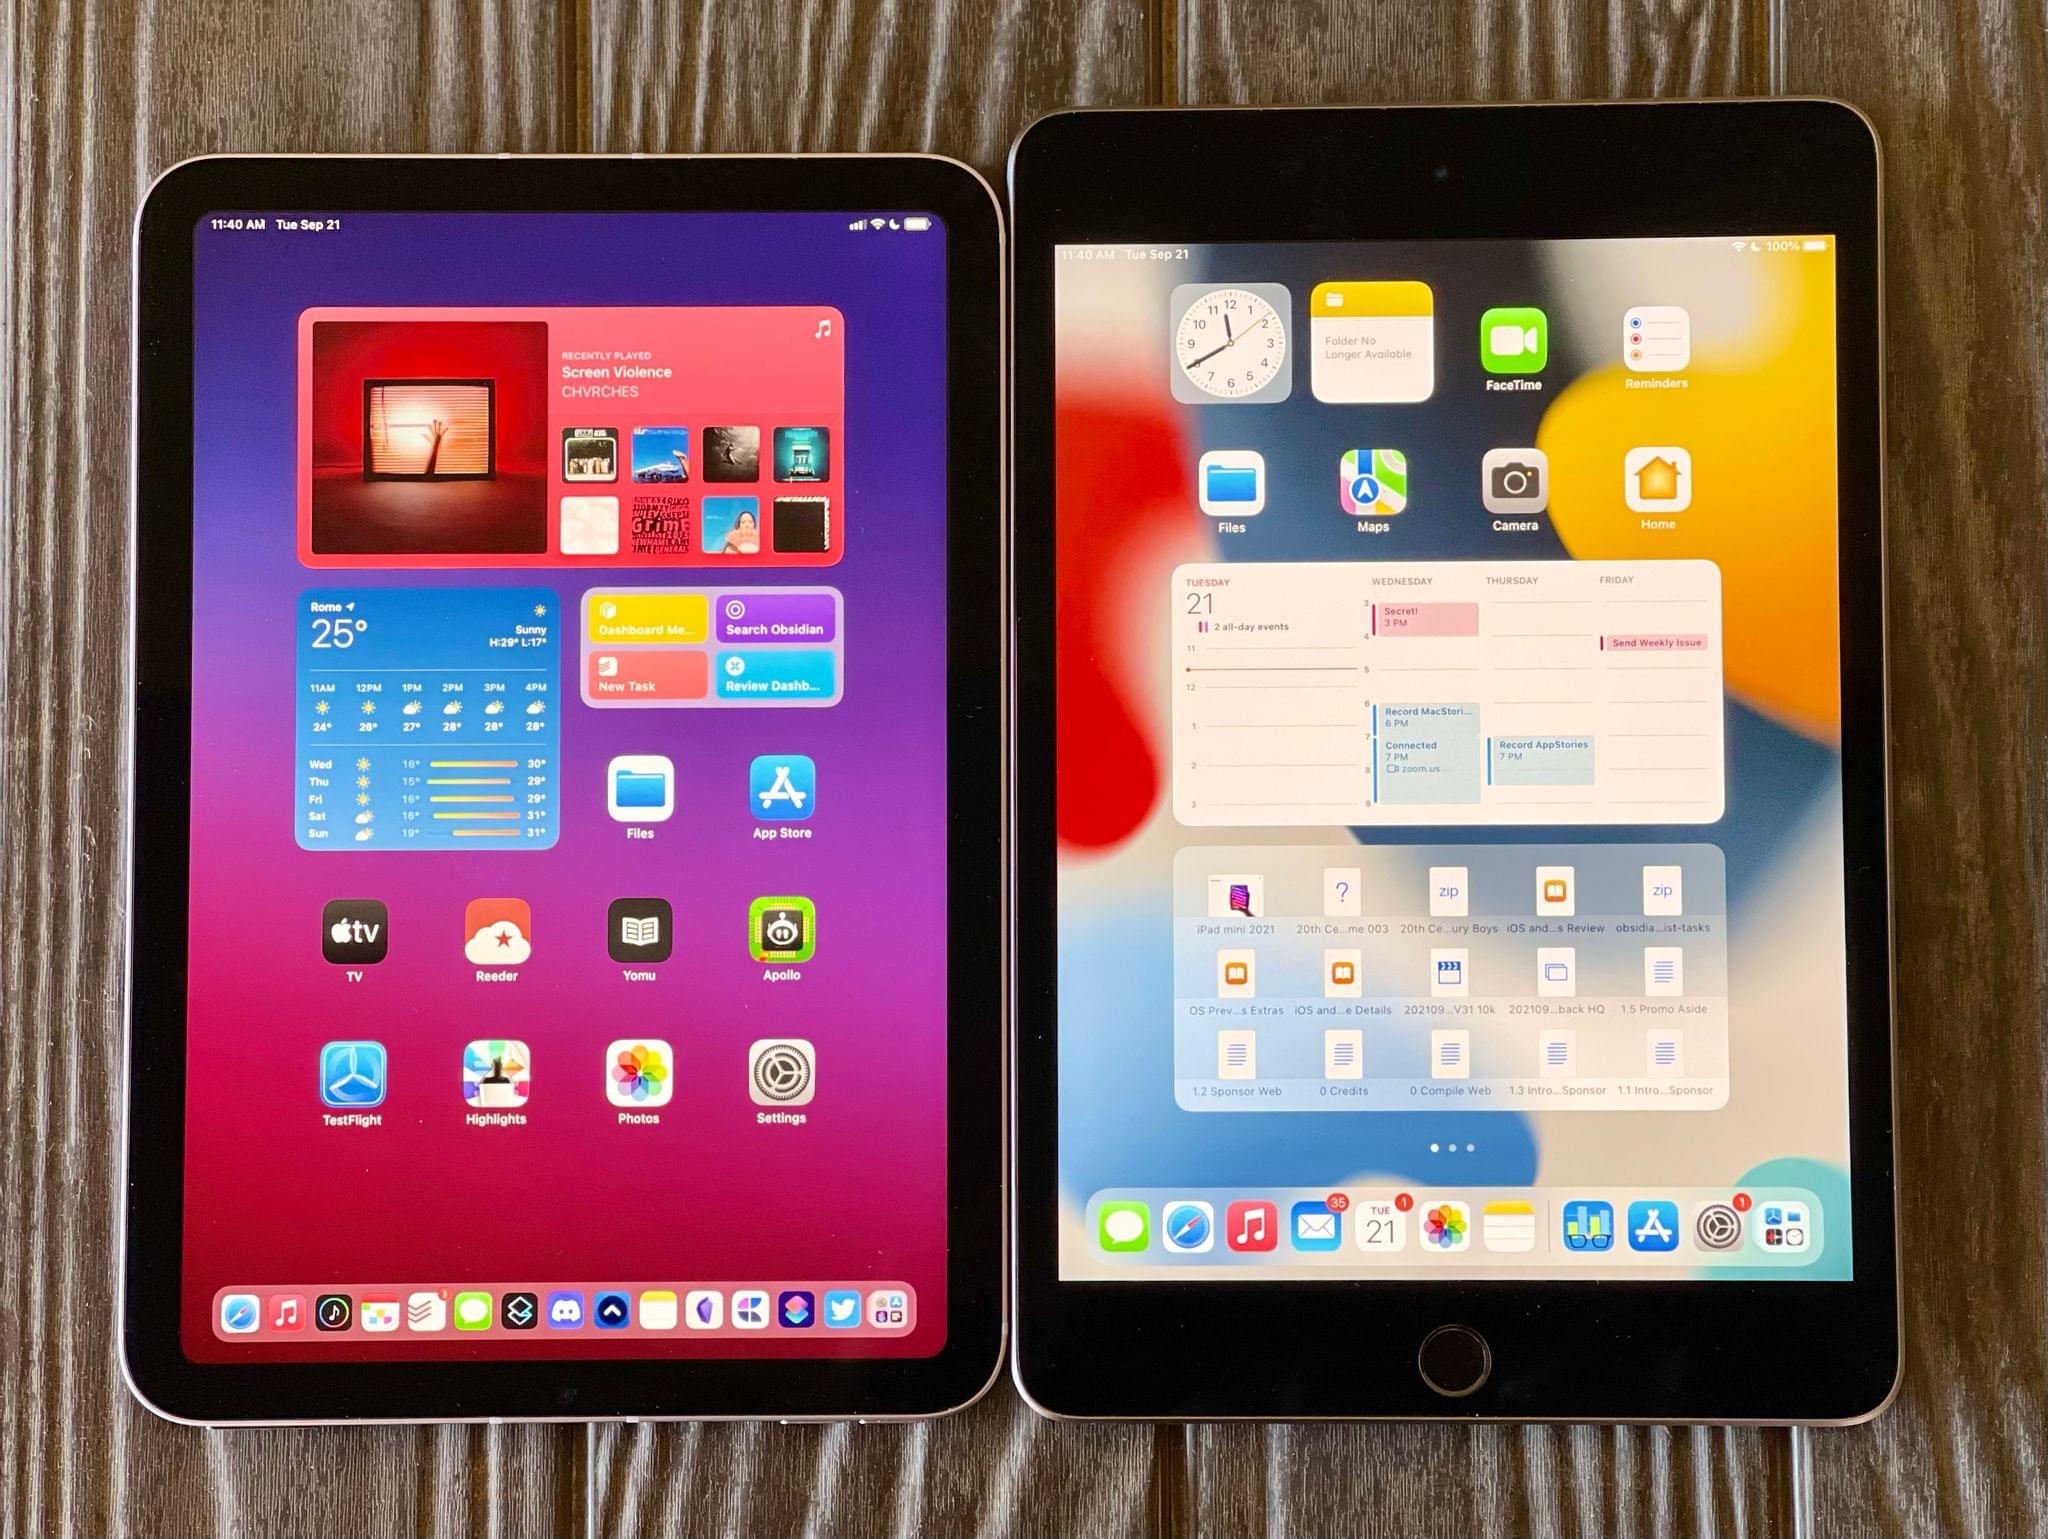 The new iPad mini is physically smaller than the old model, but it has a taller display.